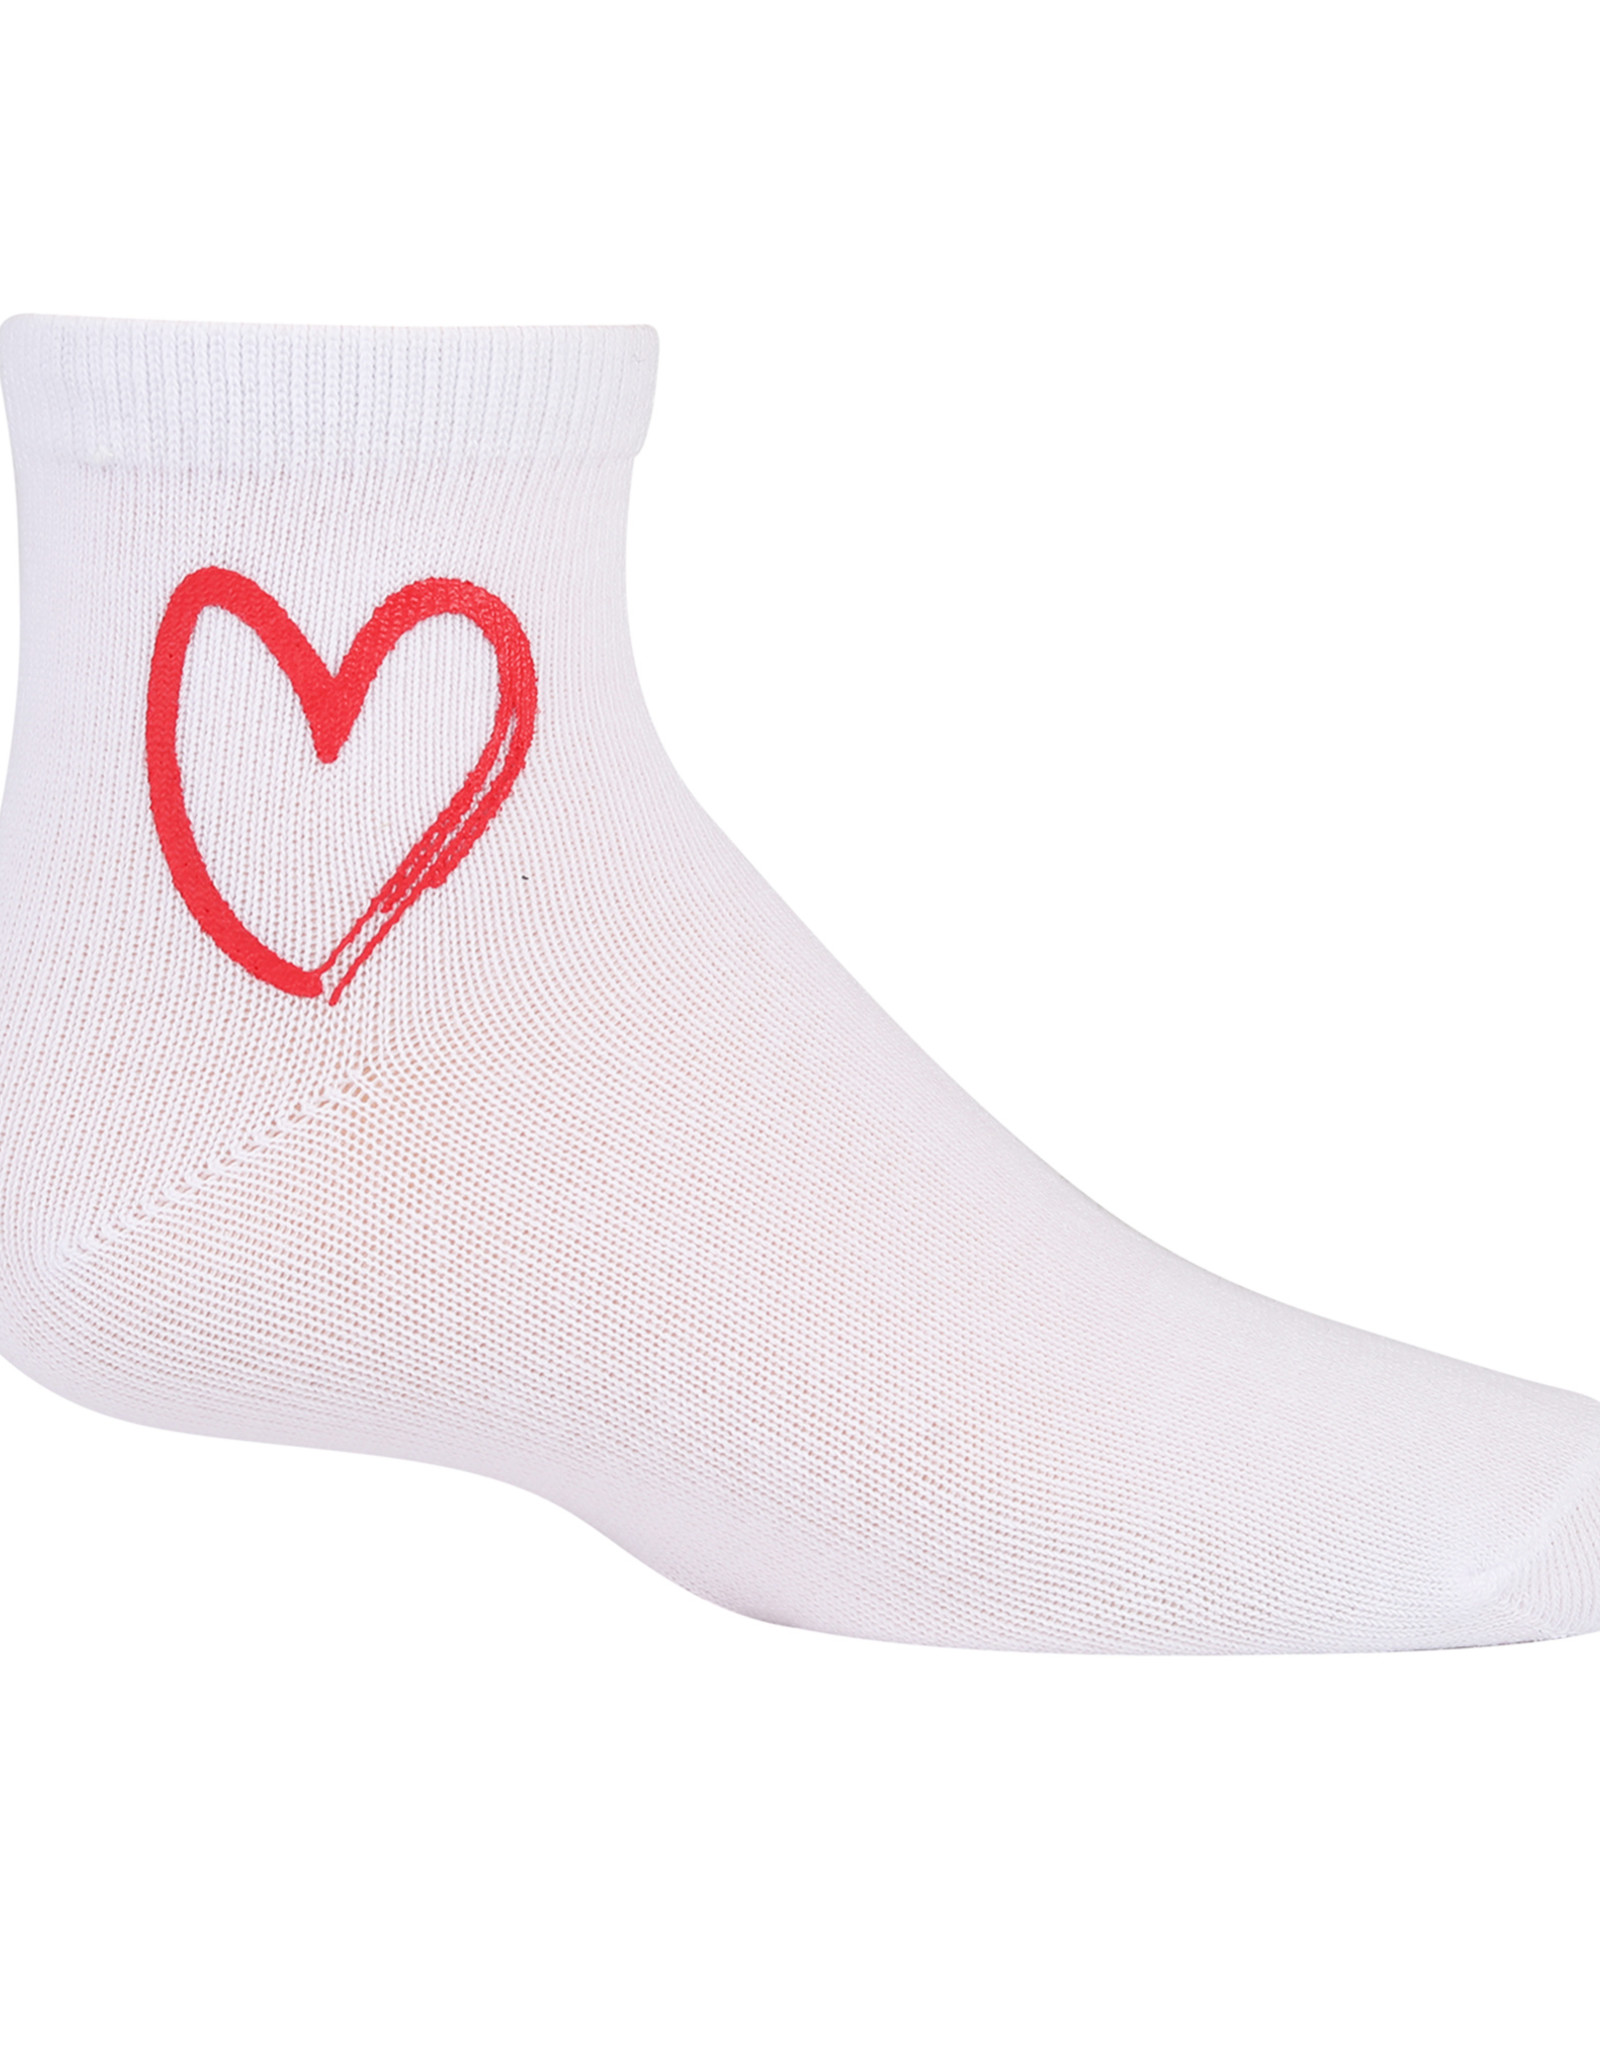 Zubii Zubii Painted Heart Ankle Sock